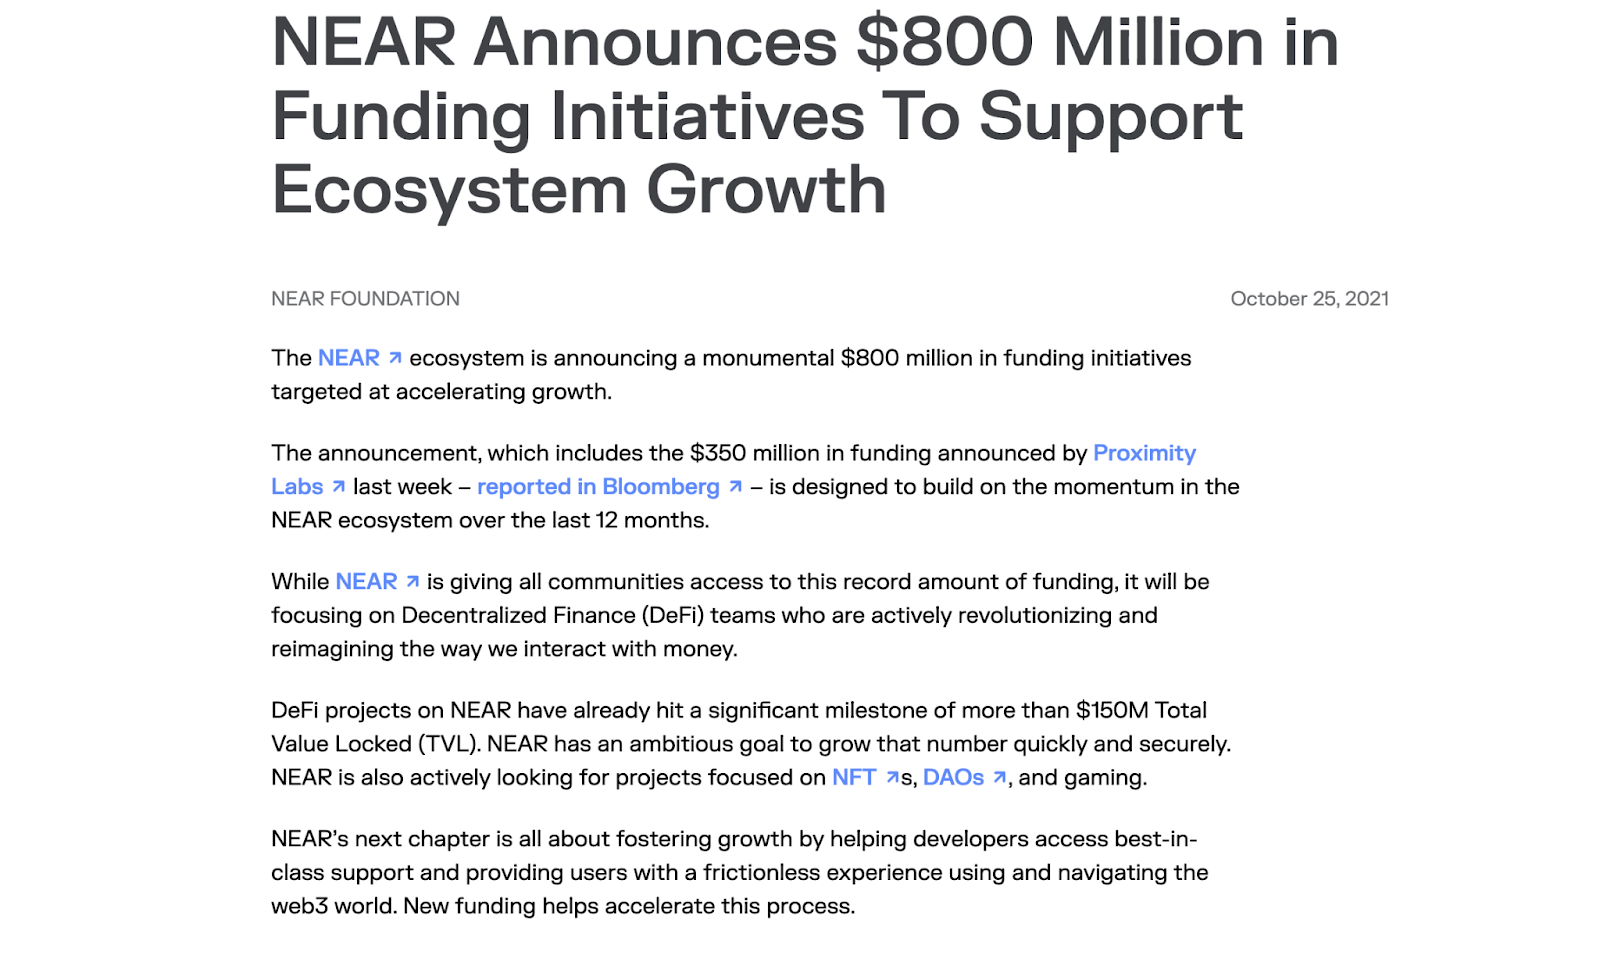 <a href="https://near.org/blog/near-announces-800-million-in-funding-initiatives-to-support-ecosystem-growth">NEAR Announces $800 Million in Funding Initiatives To Support Ecosystem Growth</a>